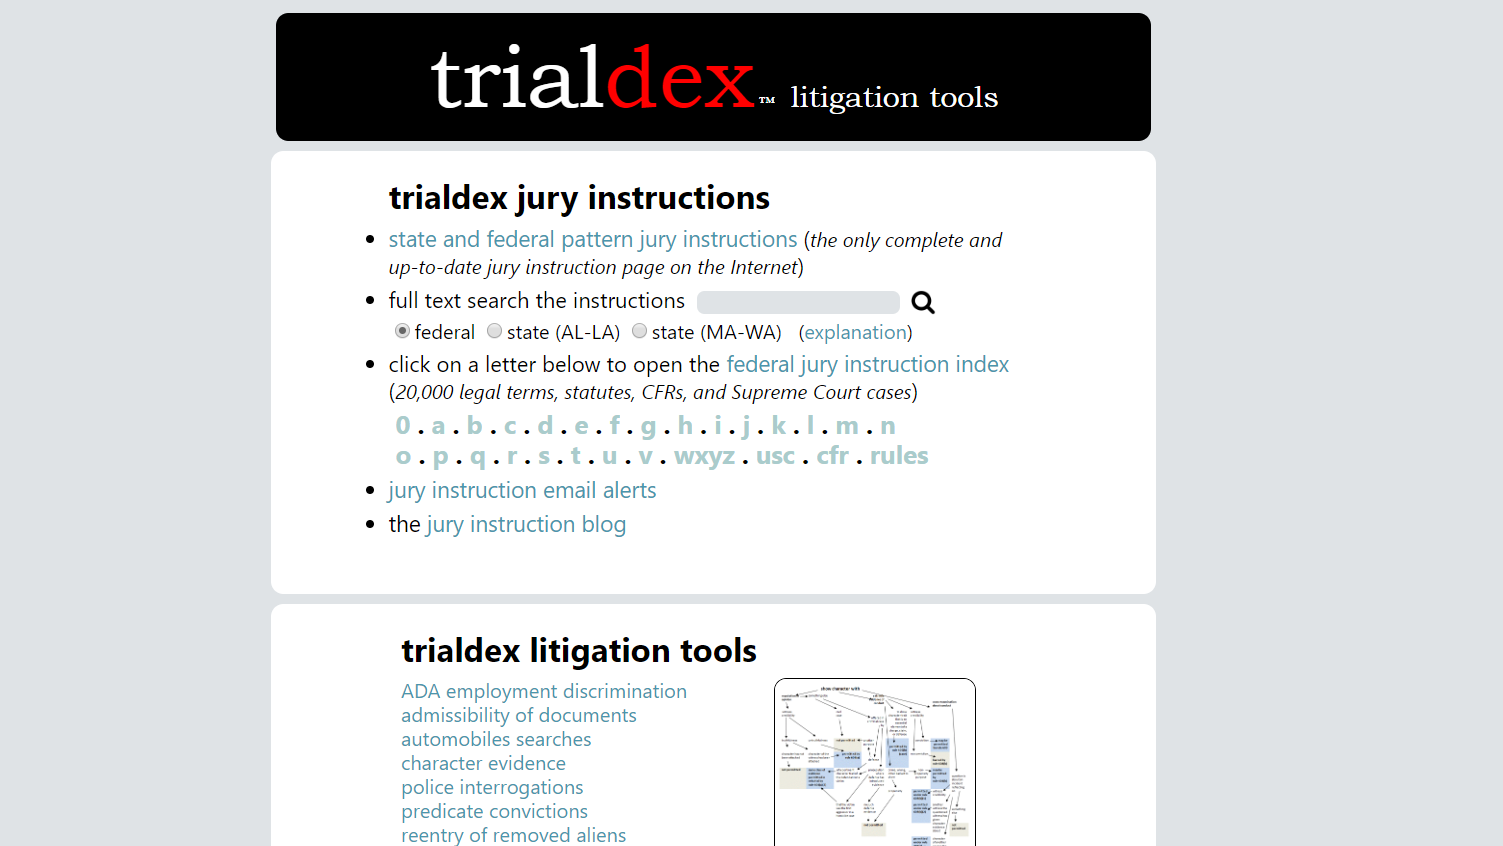 New Site Is Comprehensive Resource for Federal and State Jury Instructions